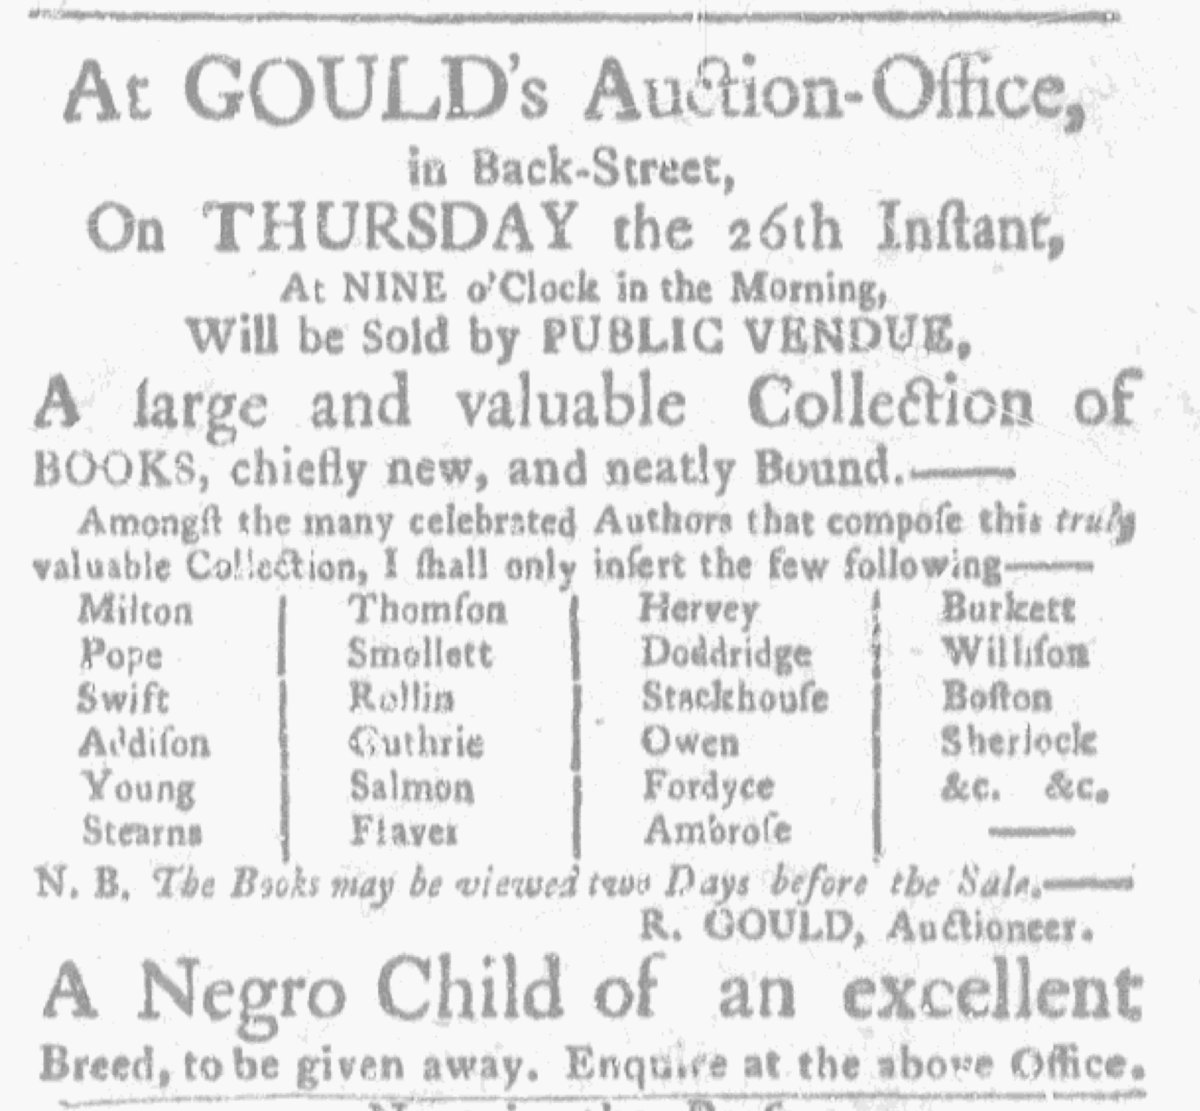 Newspapers published during the era of the American Revolution contributed to the perpetuation of slavery. Advertised 250 years ago today: “A Negro Child of an excellent Breed, to be given away.” (Massachusetts Gazette & Boston Weekly News-Letter 5/19/1774)